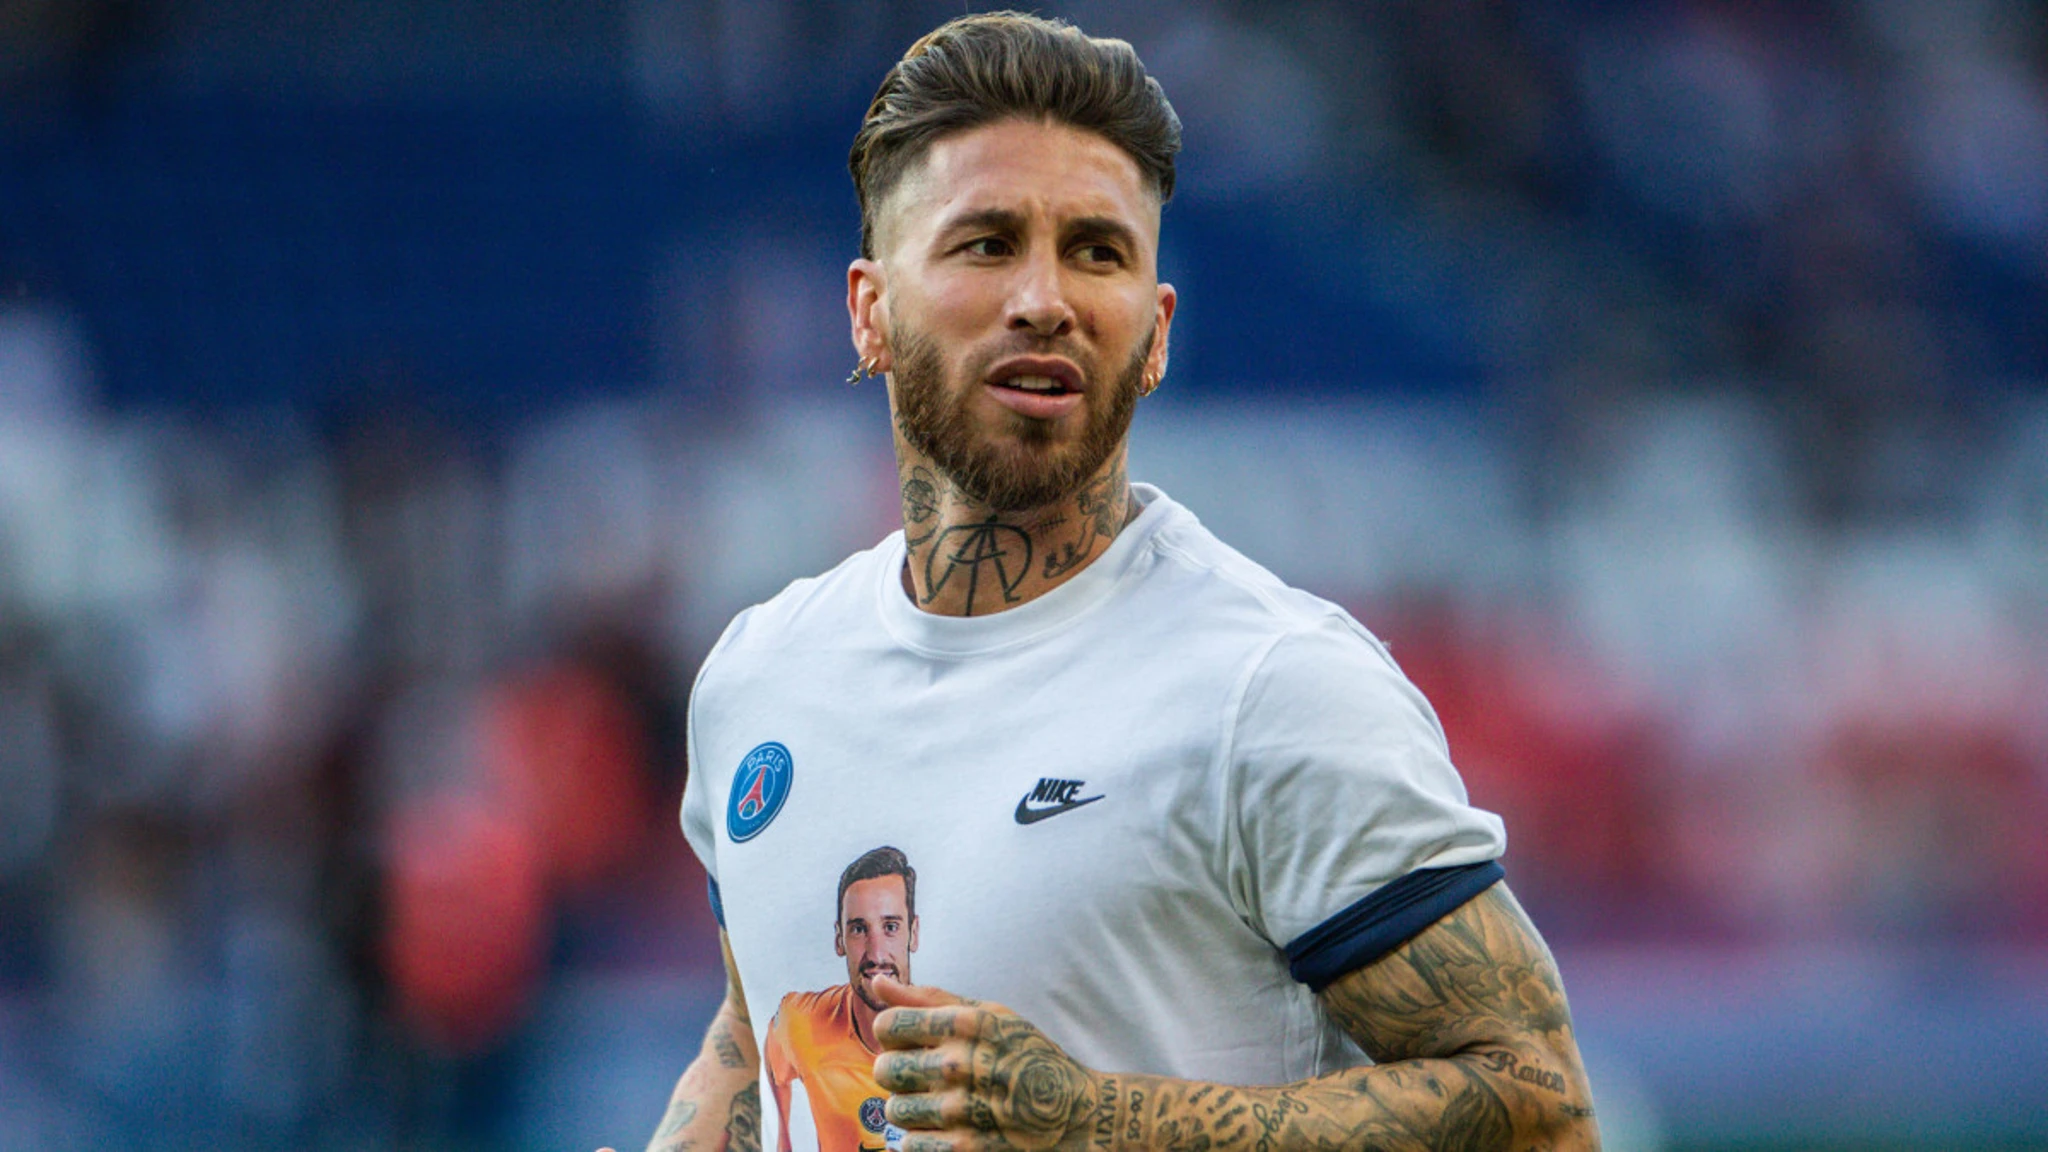 A special return for Sergio Ramos with Sevilla FC